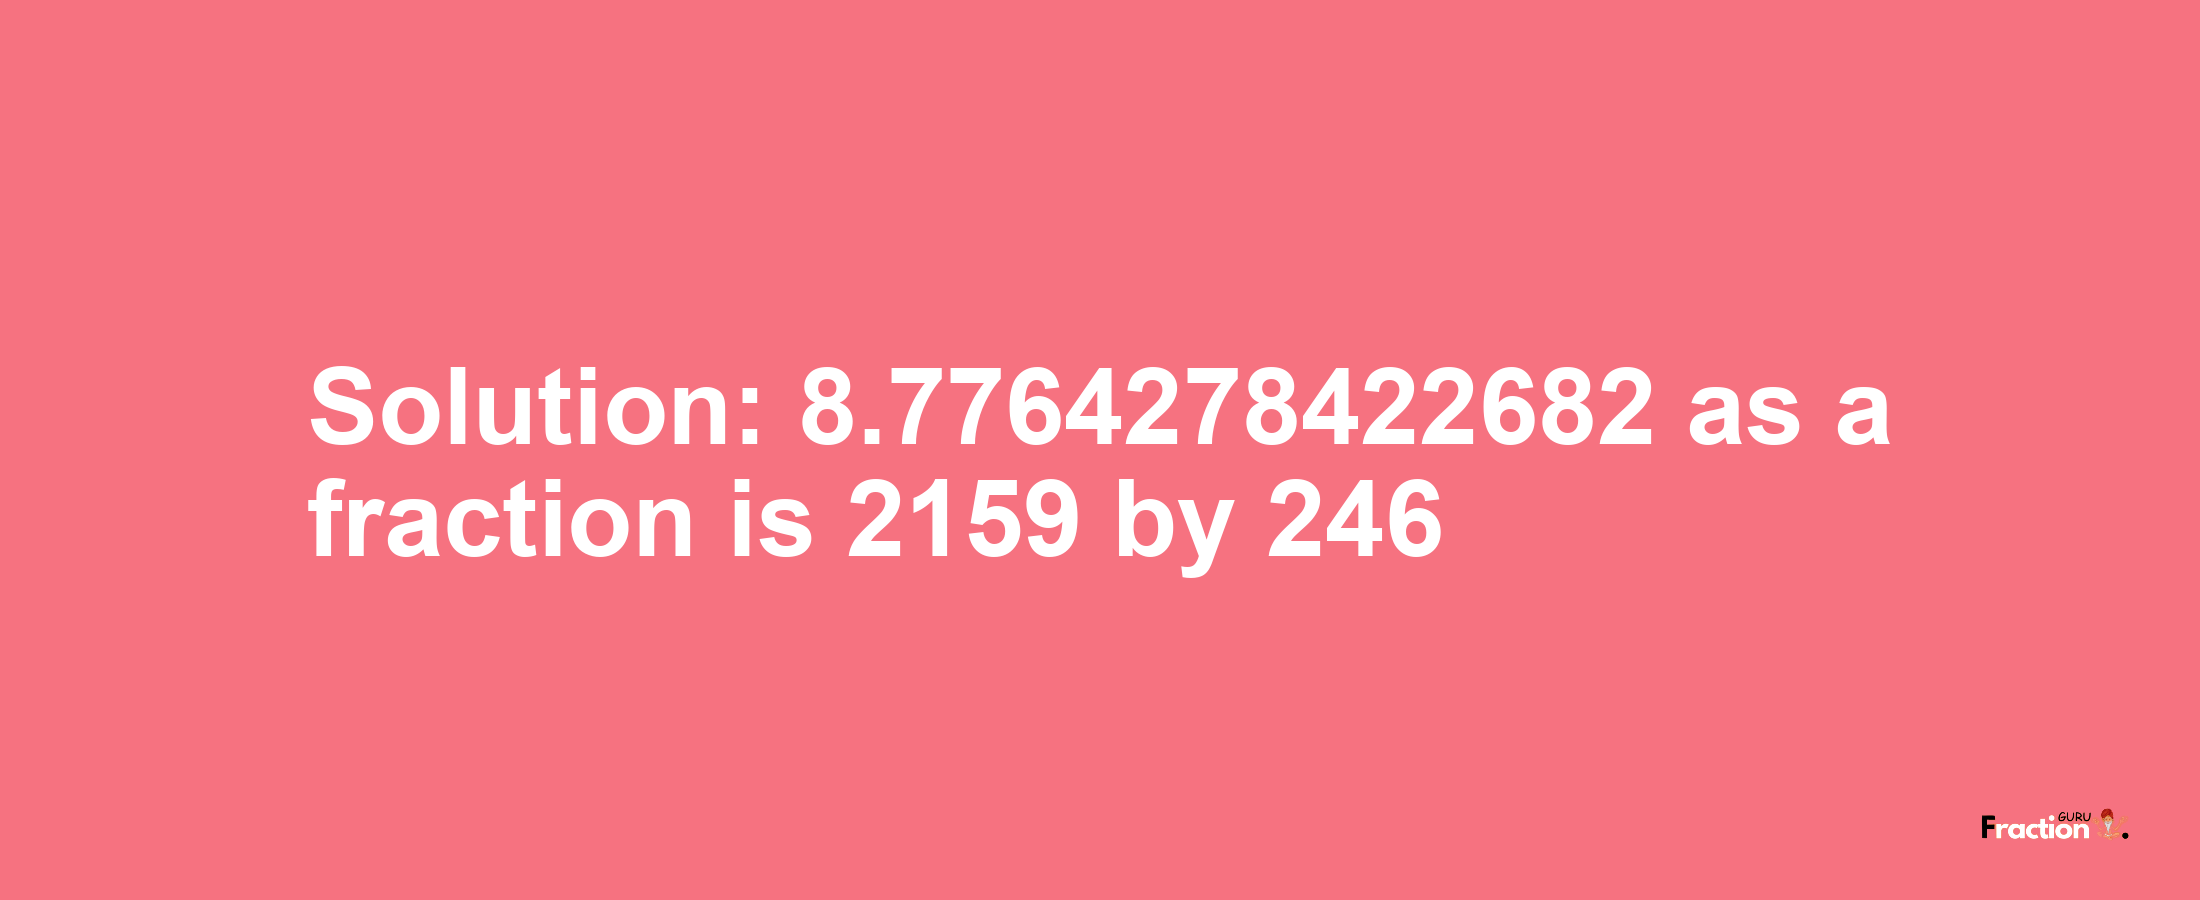 Solution:8.7764278422682 as a fraction is 2159/246